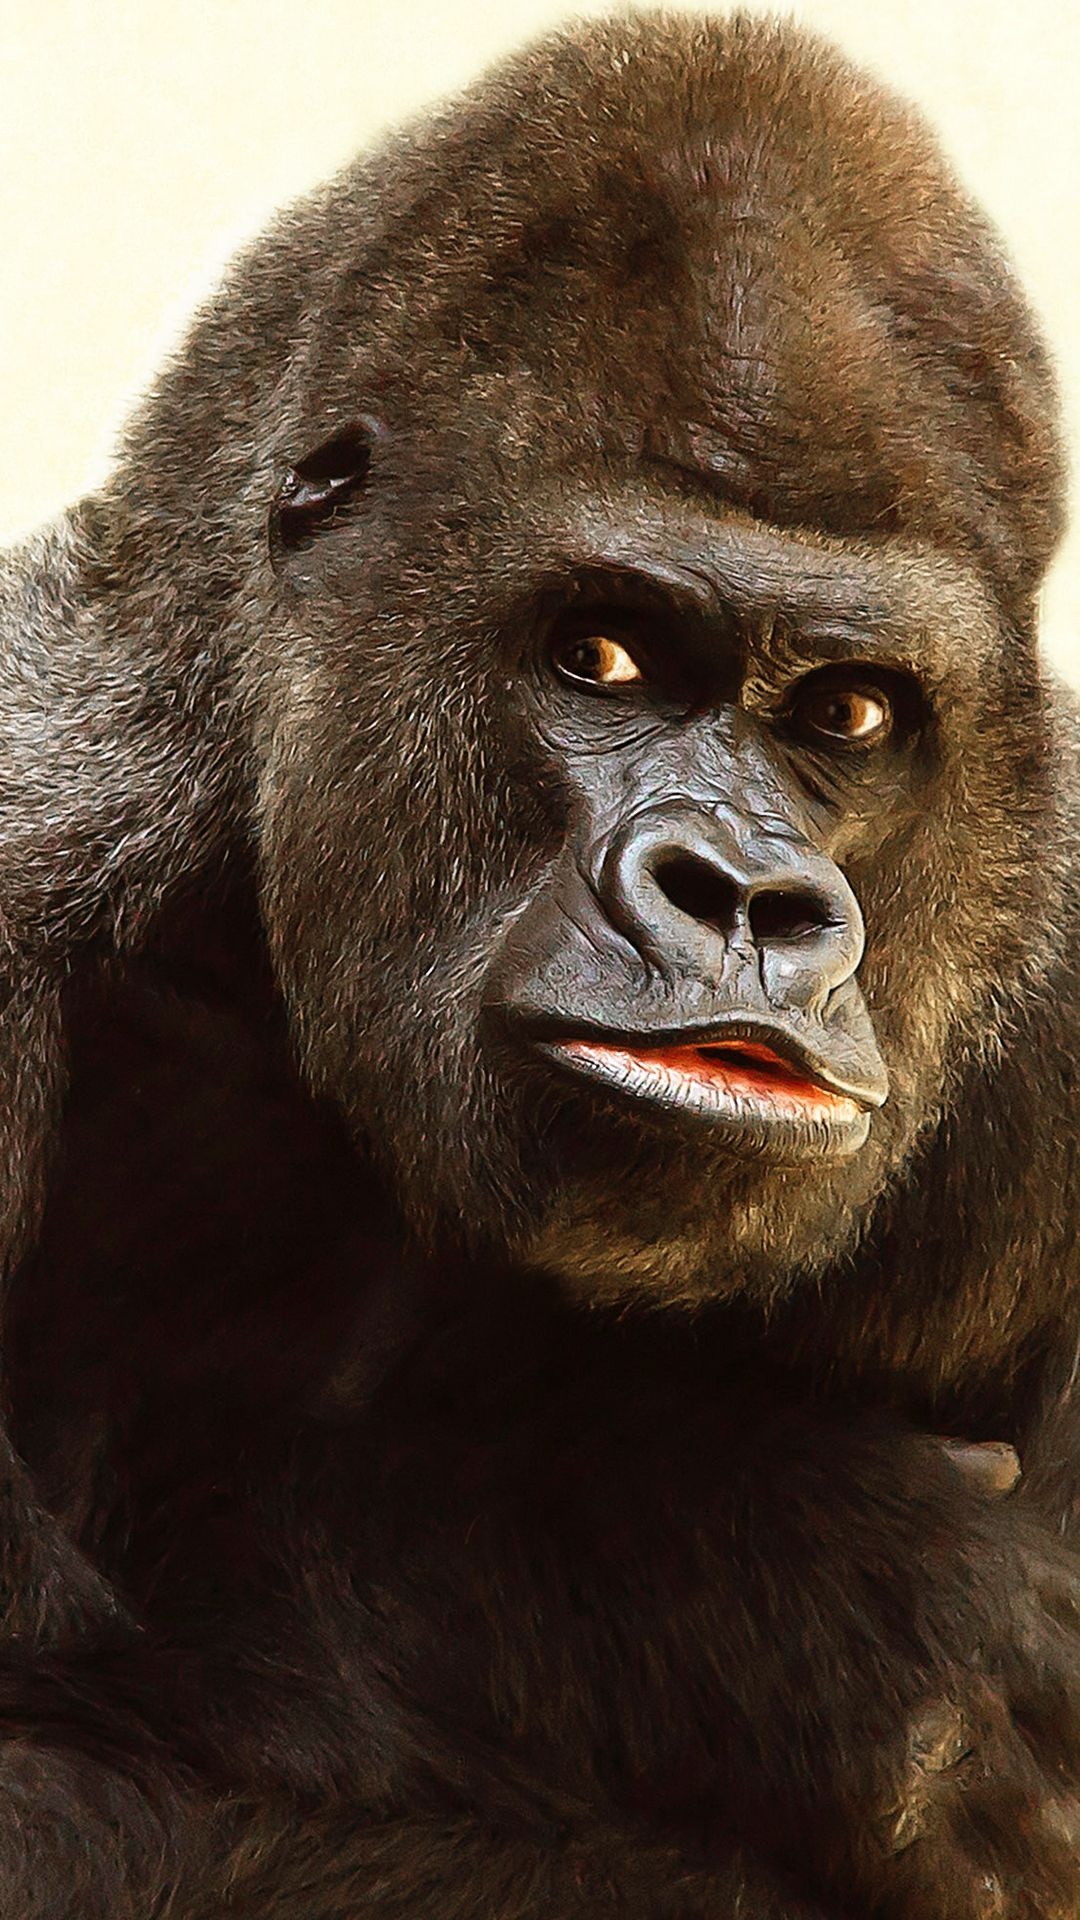 Gorilla iPhone wallpapers, Top choices, Mobile backgrounds, Ape obsession, 1080x1920 Full HD Phone